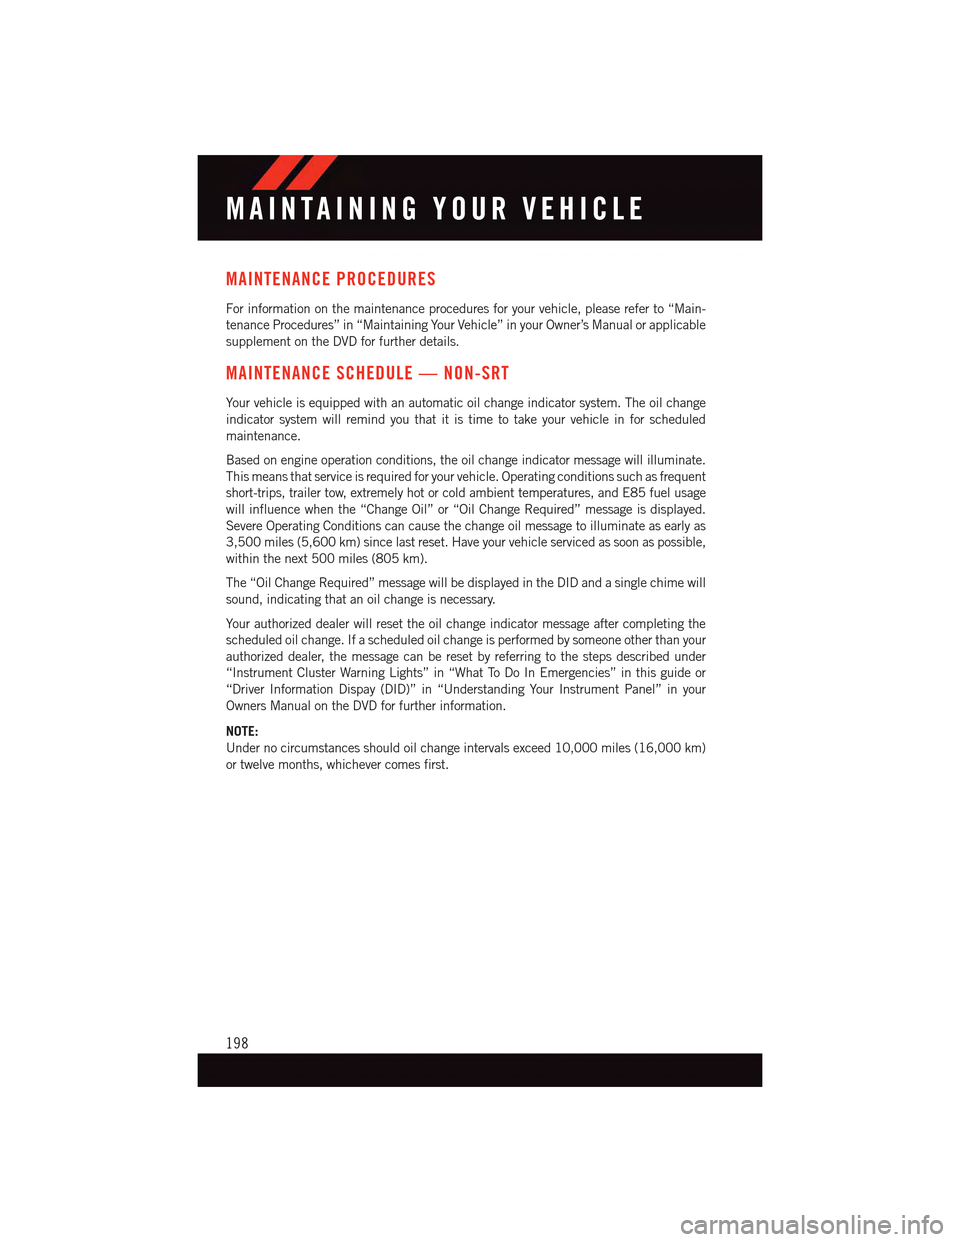 DODGE CHARGER 2015 7.G User Guide MAINTENANCE PROCEDURES
For information on the maintenance procedures for your vehicle, please refer to “Main-
tenance Procedures” in “Maintaining Your Vehicle” in your Owner’s Manual or appl